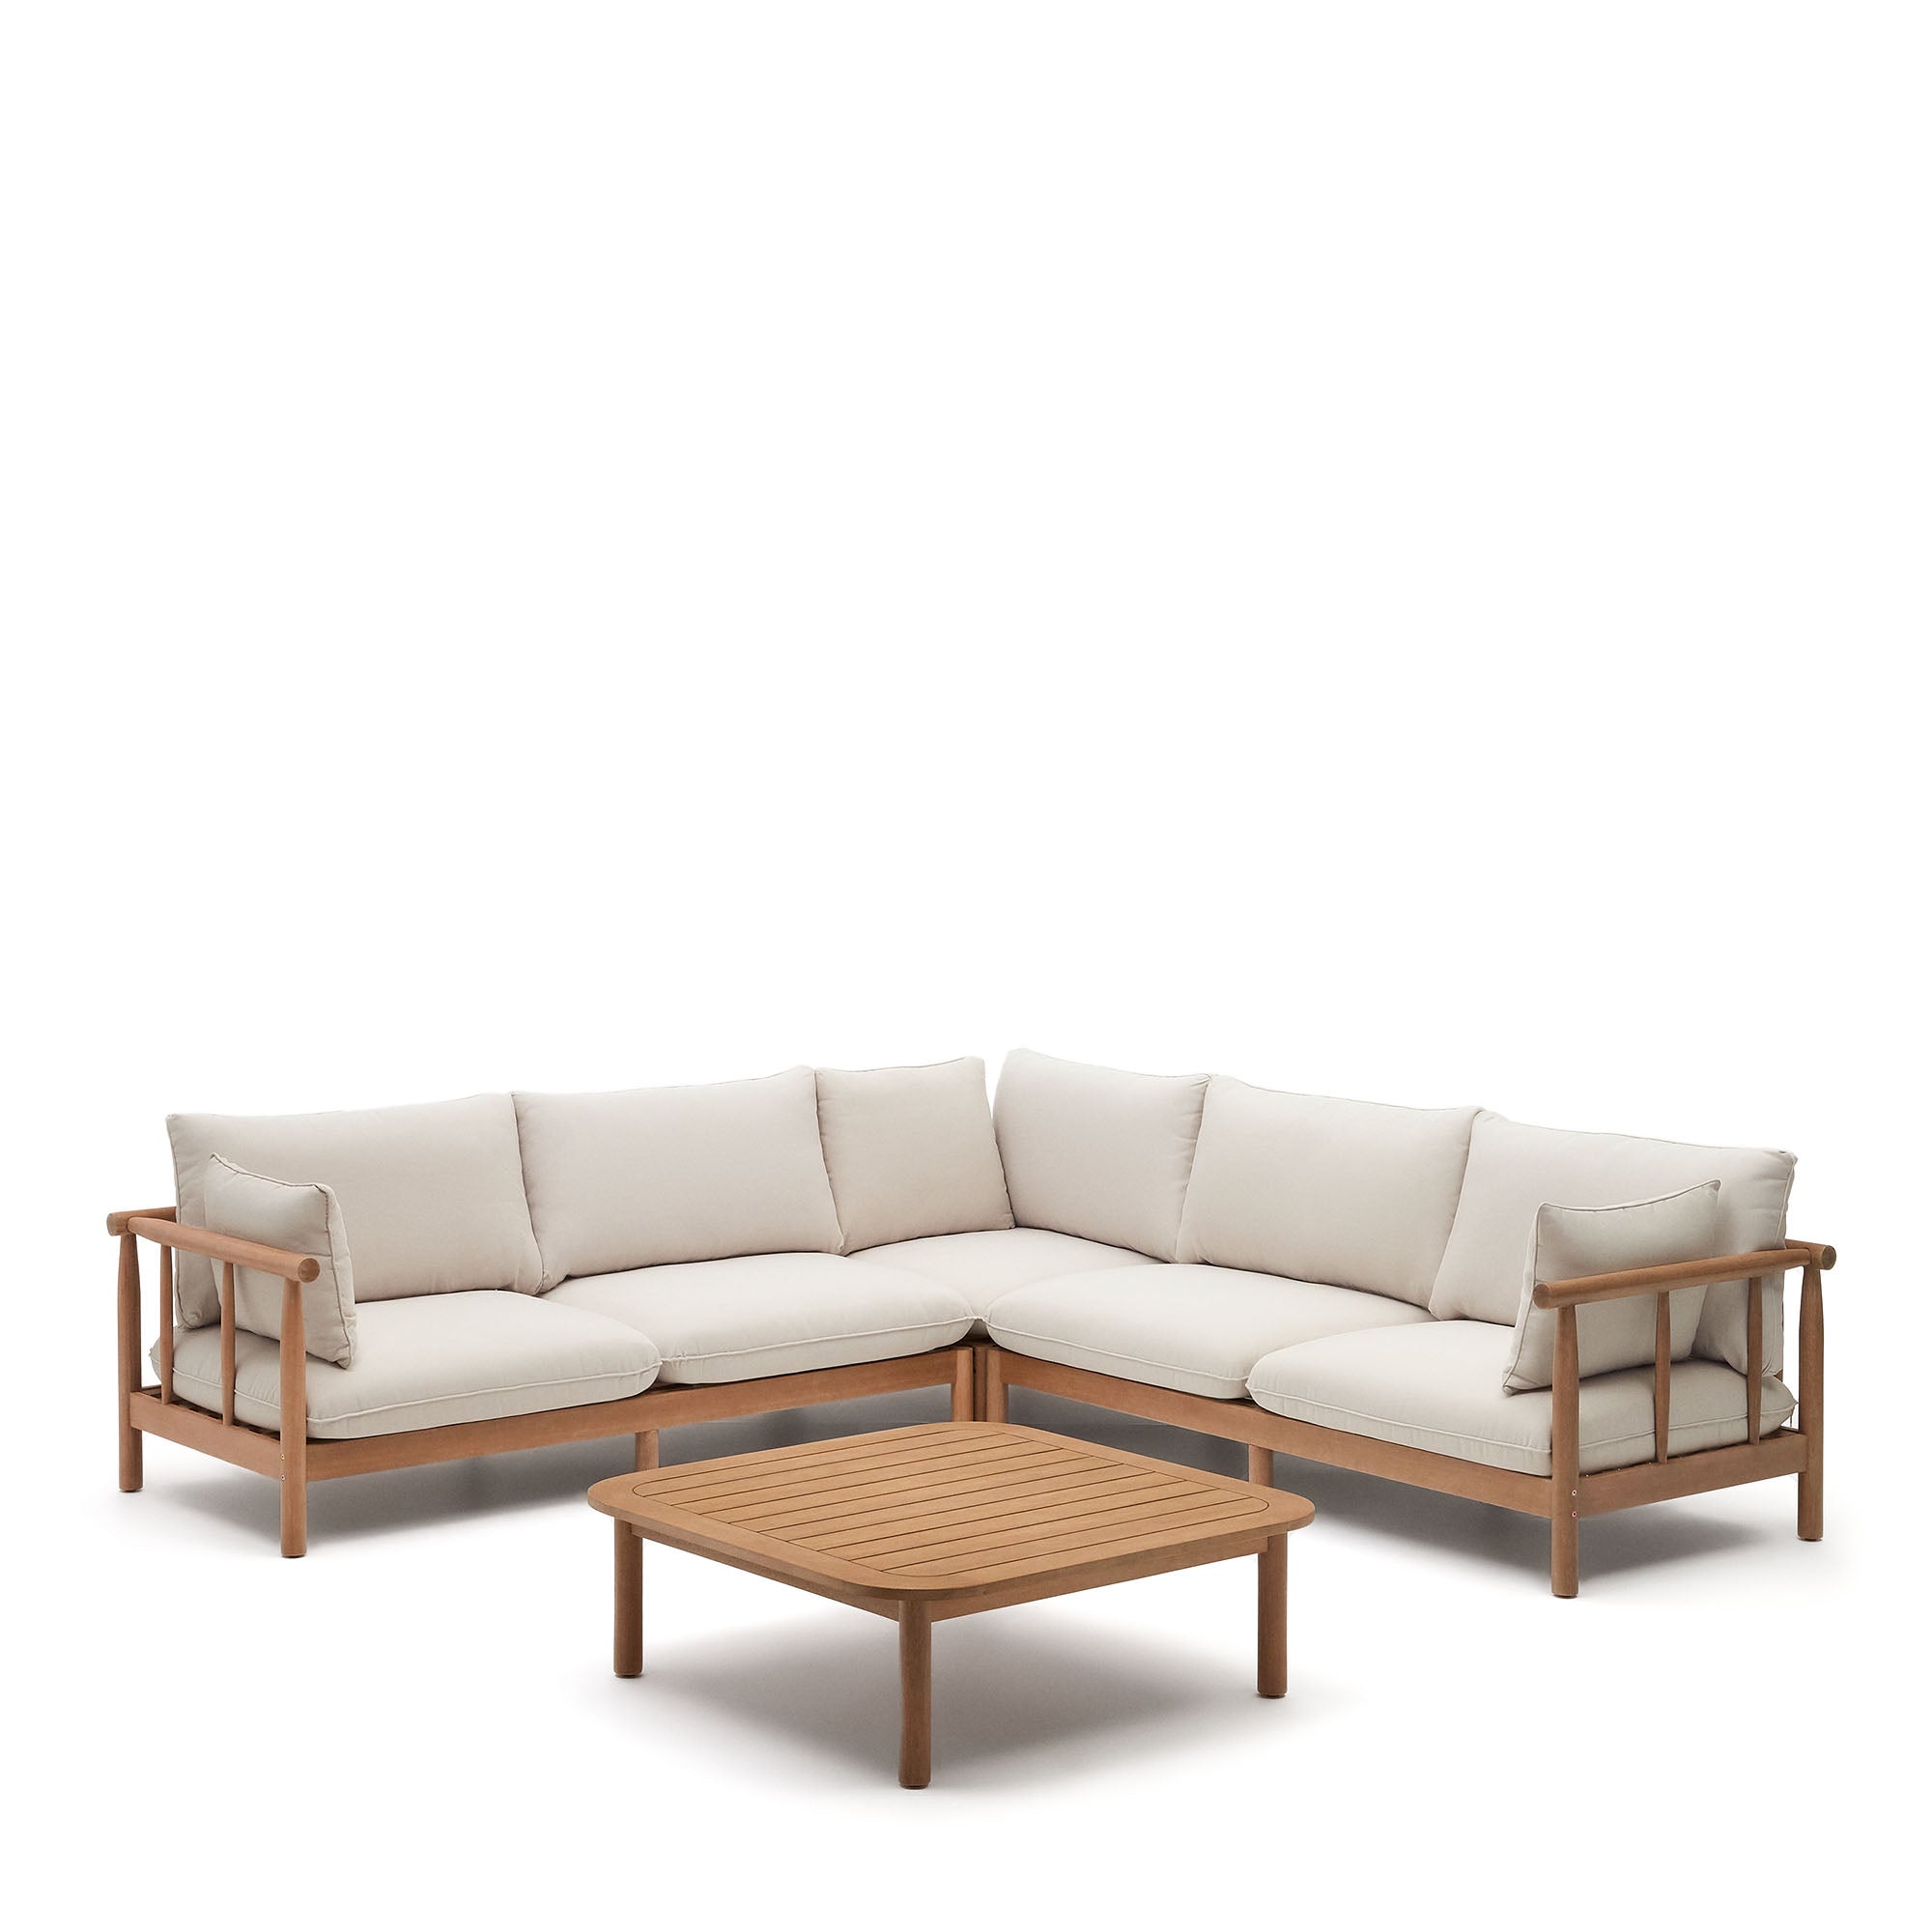 Sacova set, 5 seater corner sofa and coffee table made from solid eucalyptus wood